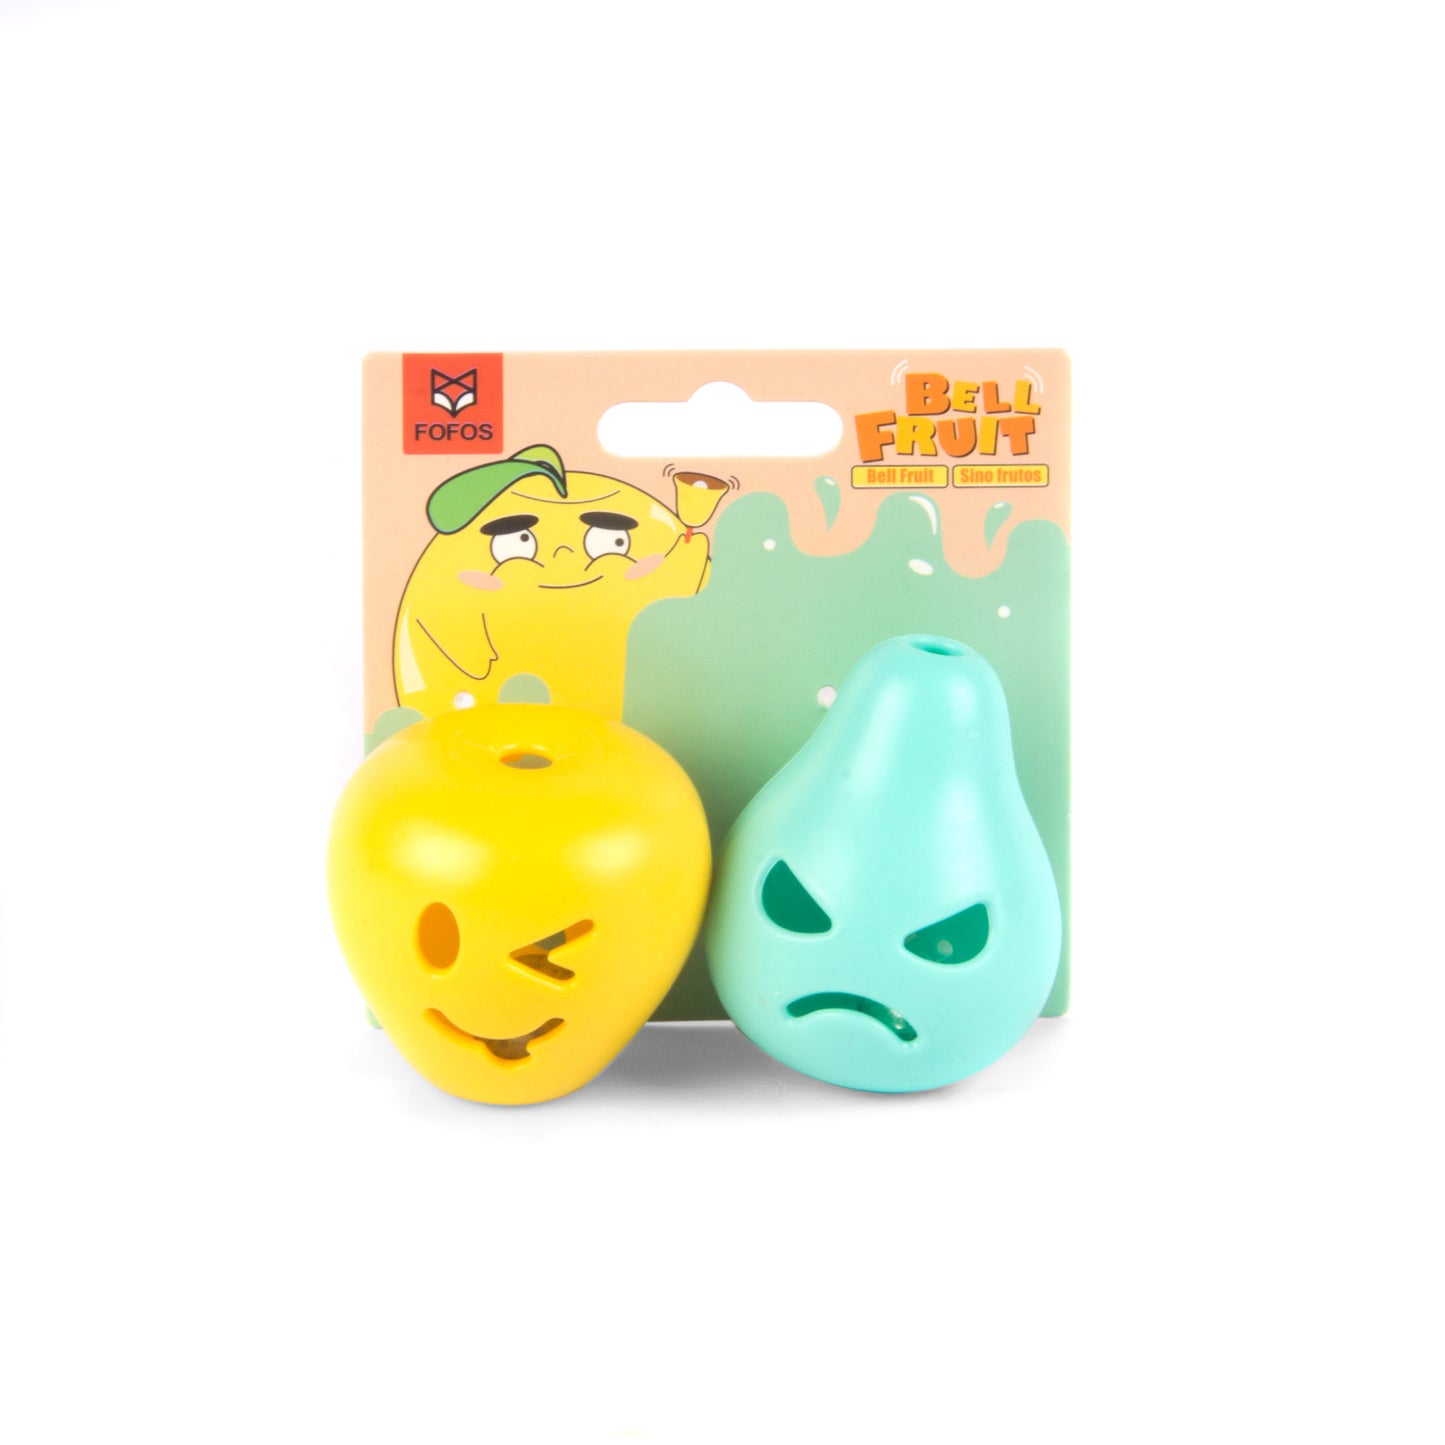 Fofos Bell Fruit Yellow & Blue